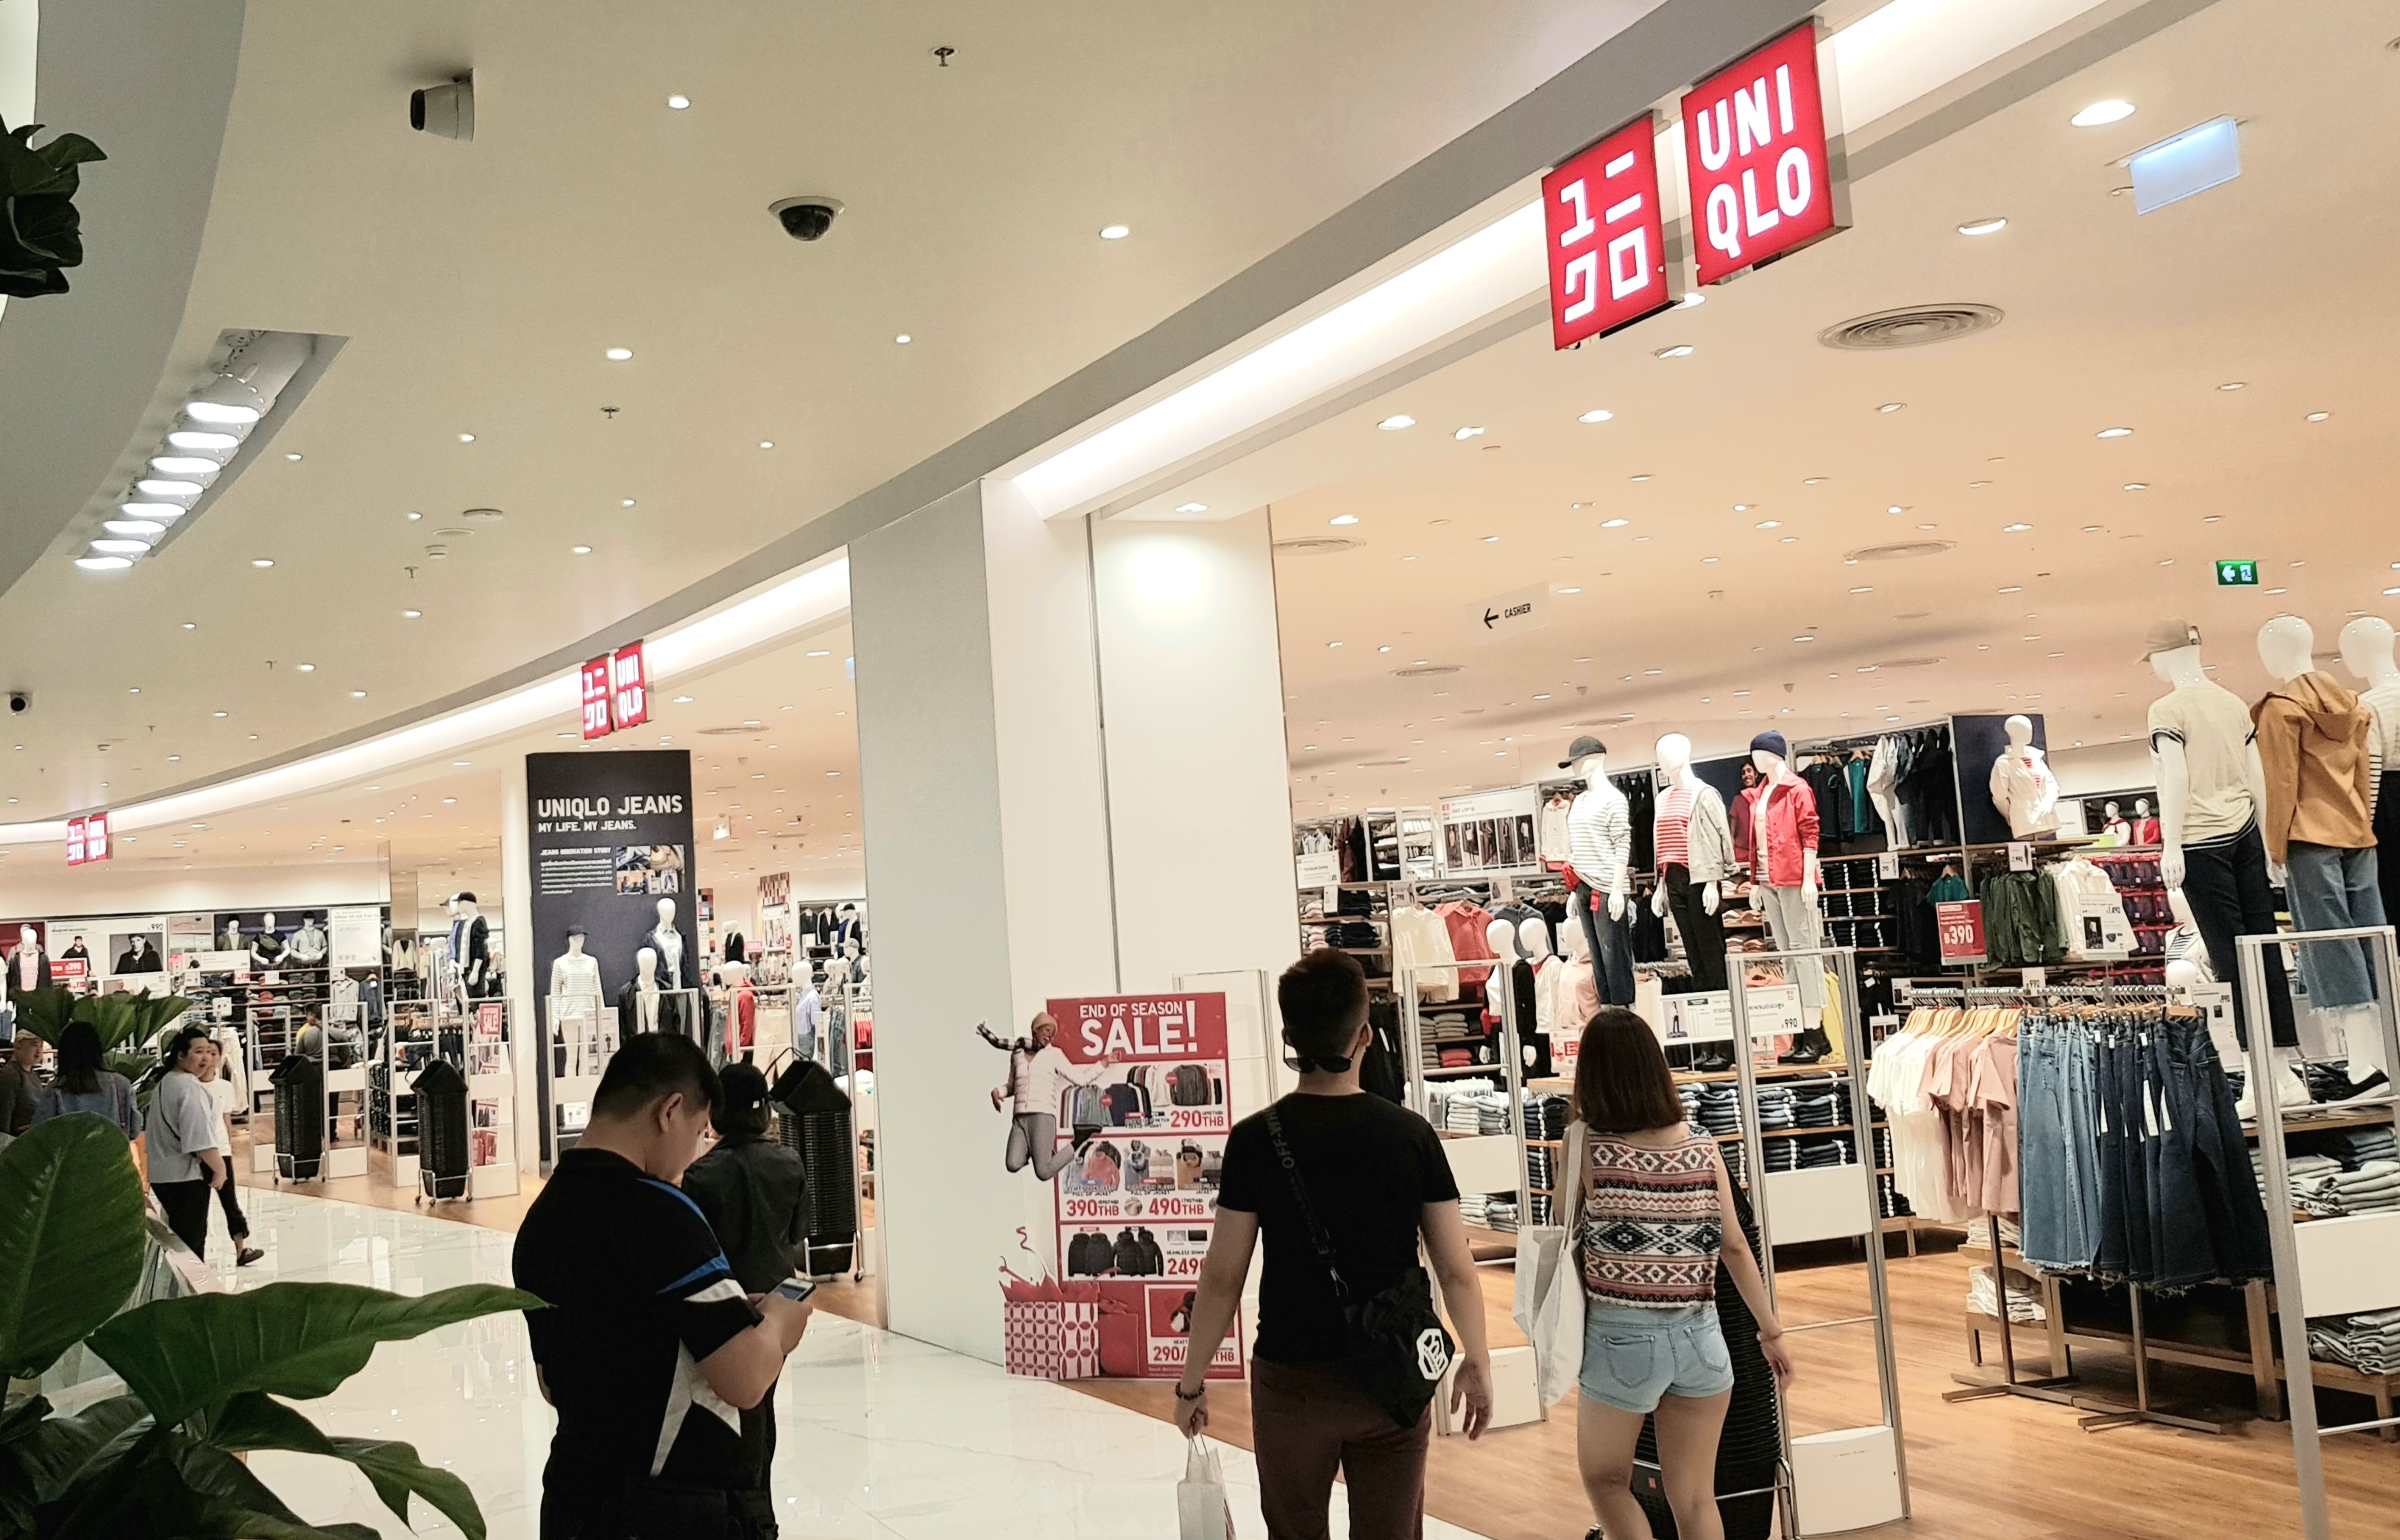 UNIQLO Malaysia  OUR FIRST ROADSIDE STORE IN MALAYSIA IS  Facebook